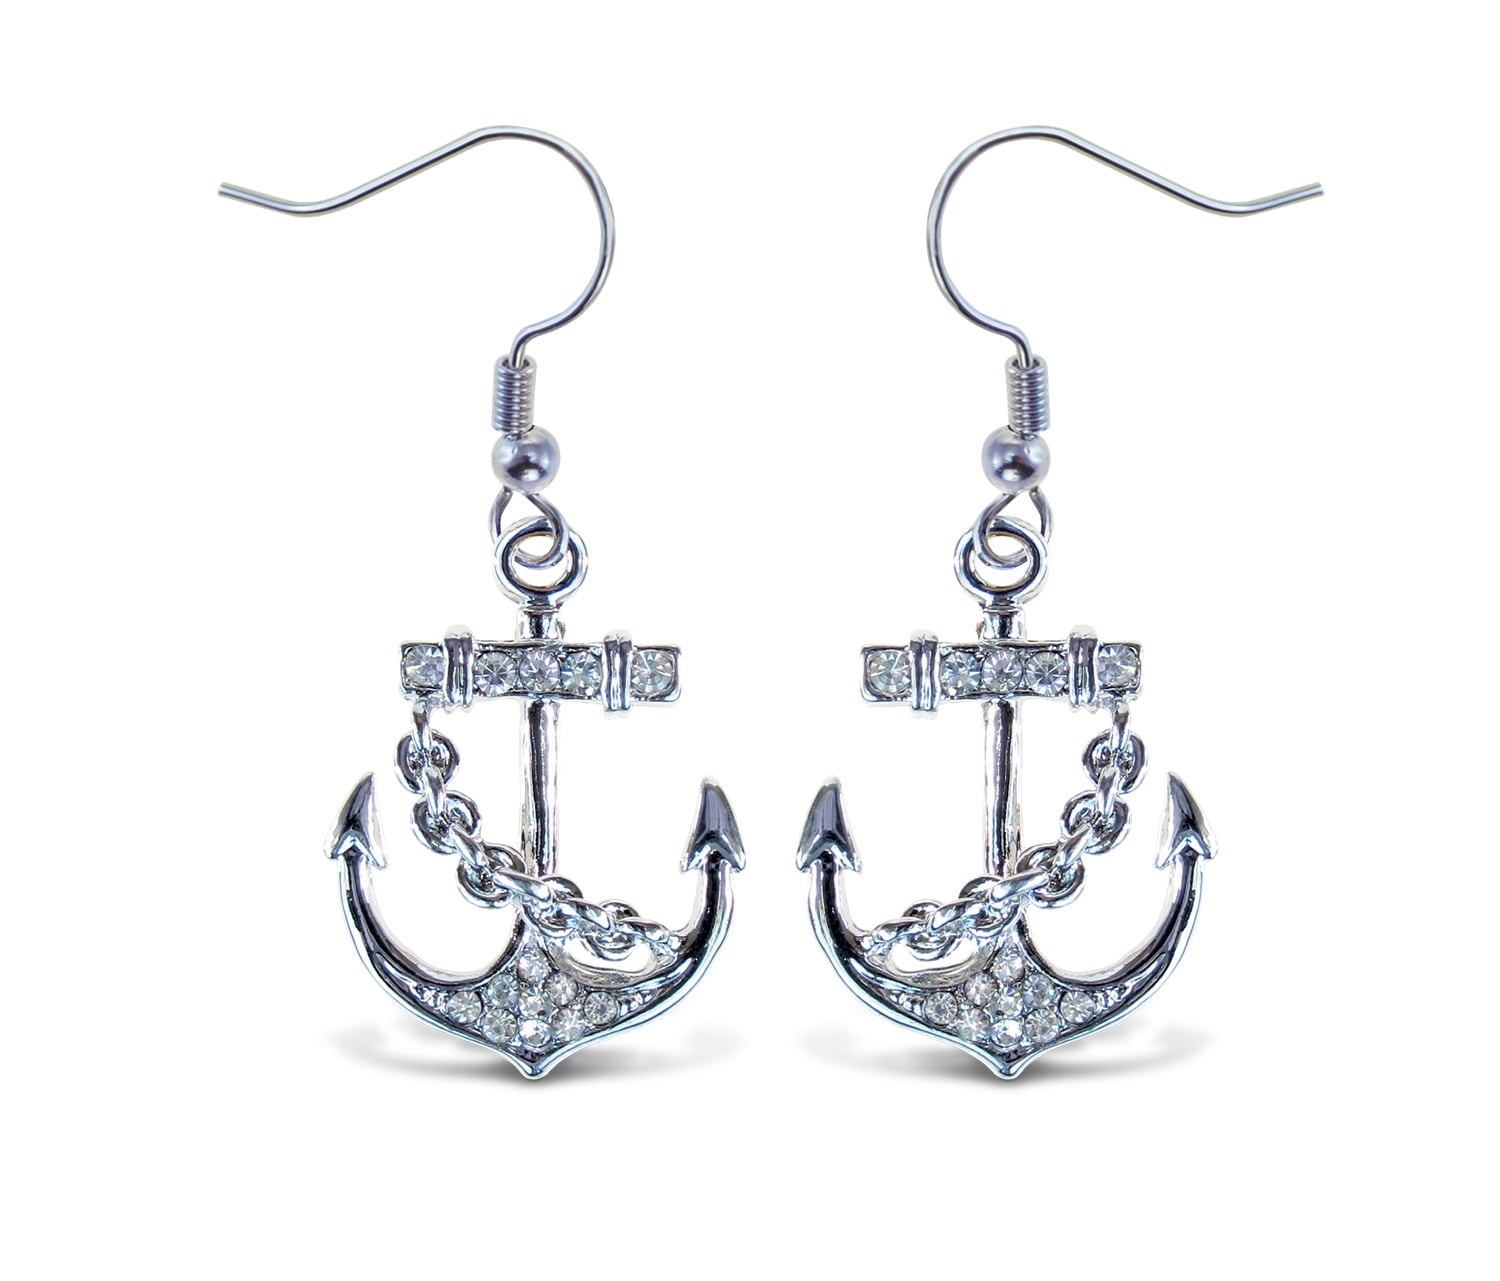 Nautical Drop Earrings 925 Sterling Silver Anchor /Compass/Rudder Studs Earrings Oceans Sailor Earrings Nautical Jewelry Gifts for Women Girls Friends 